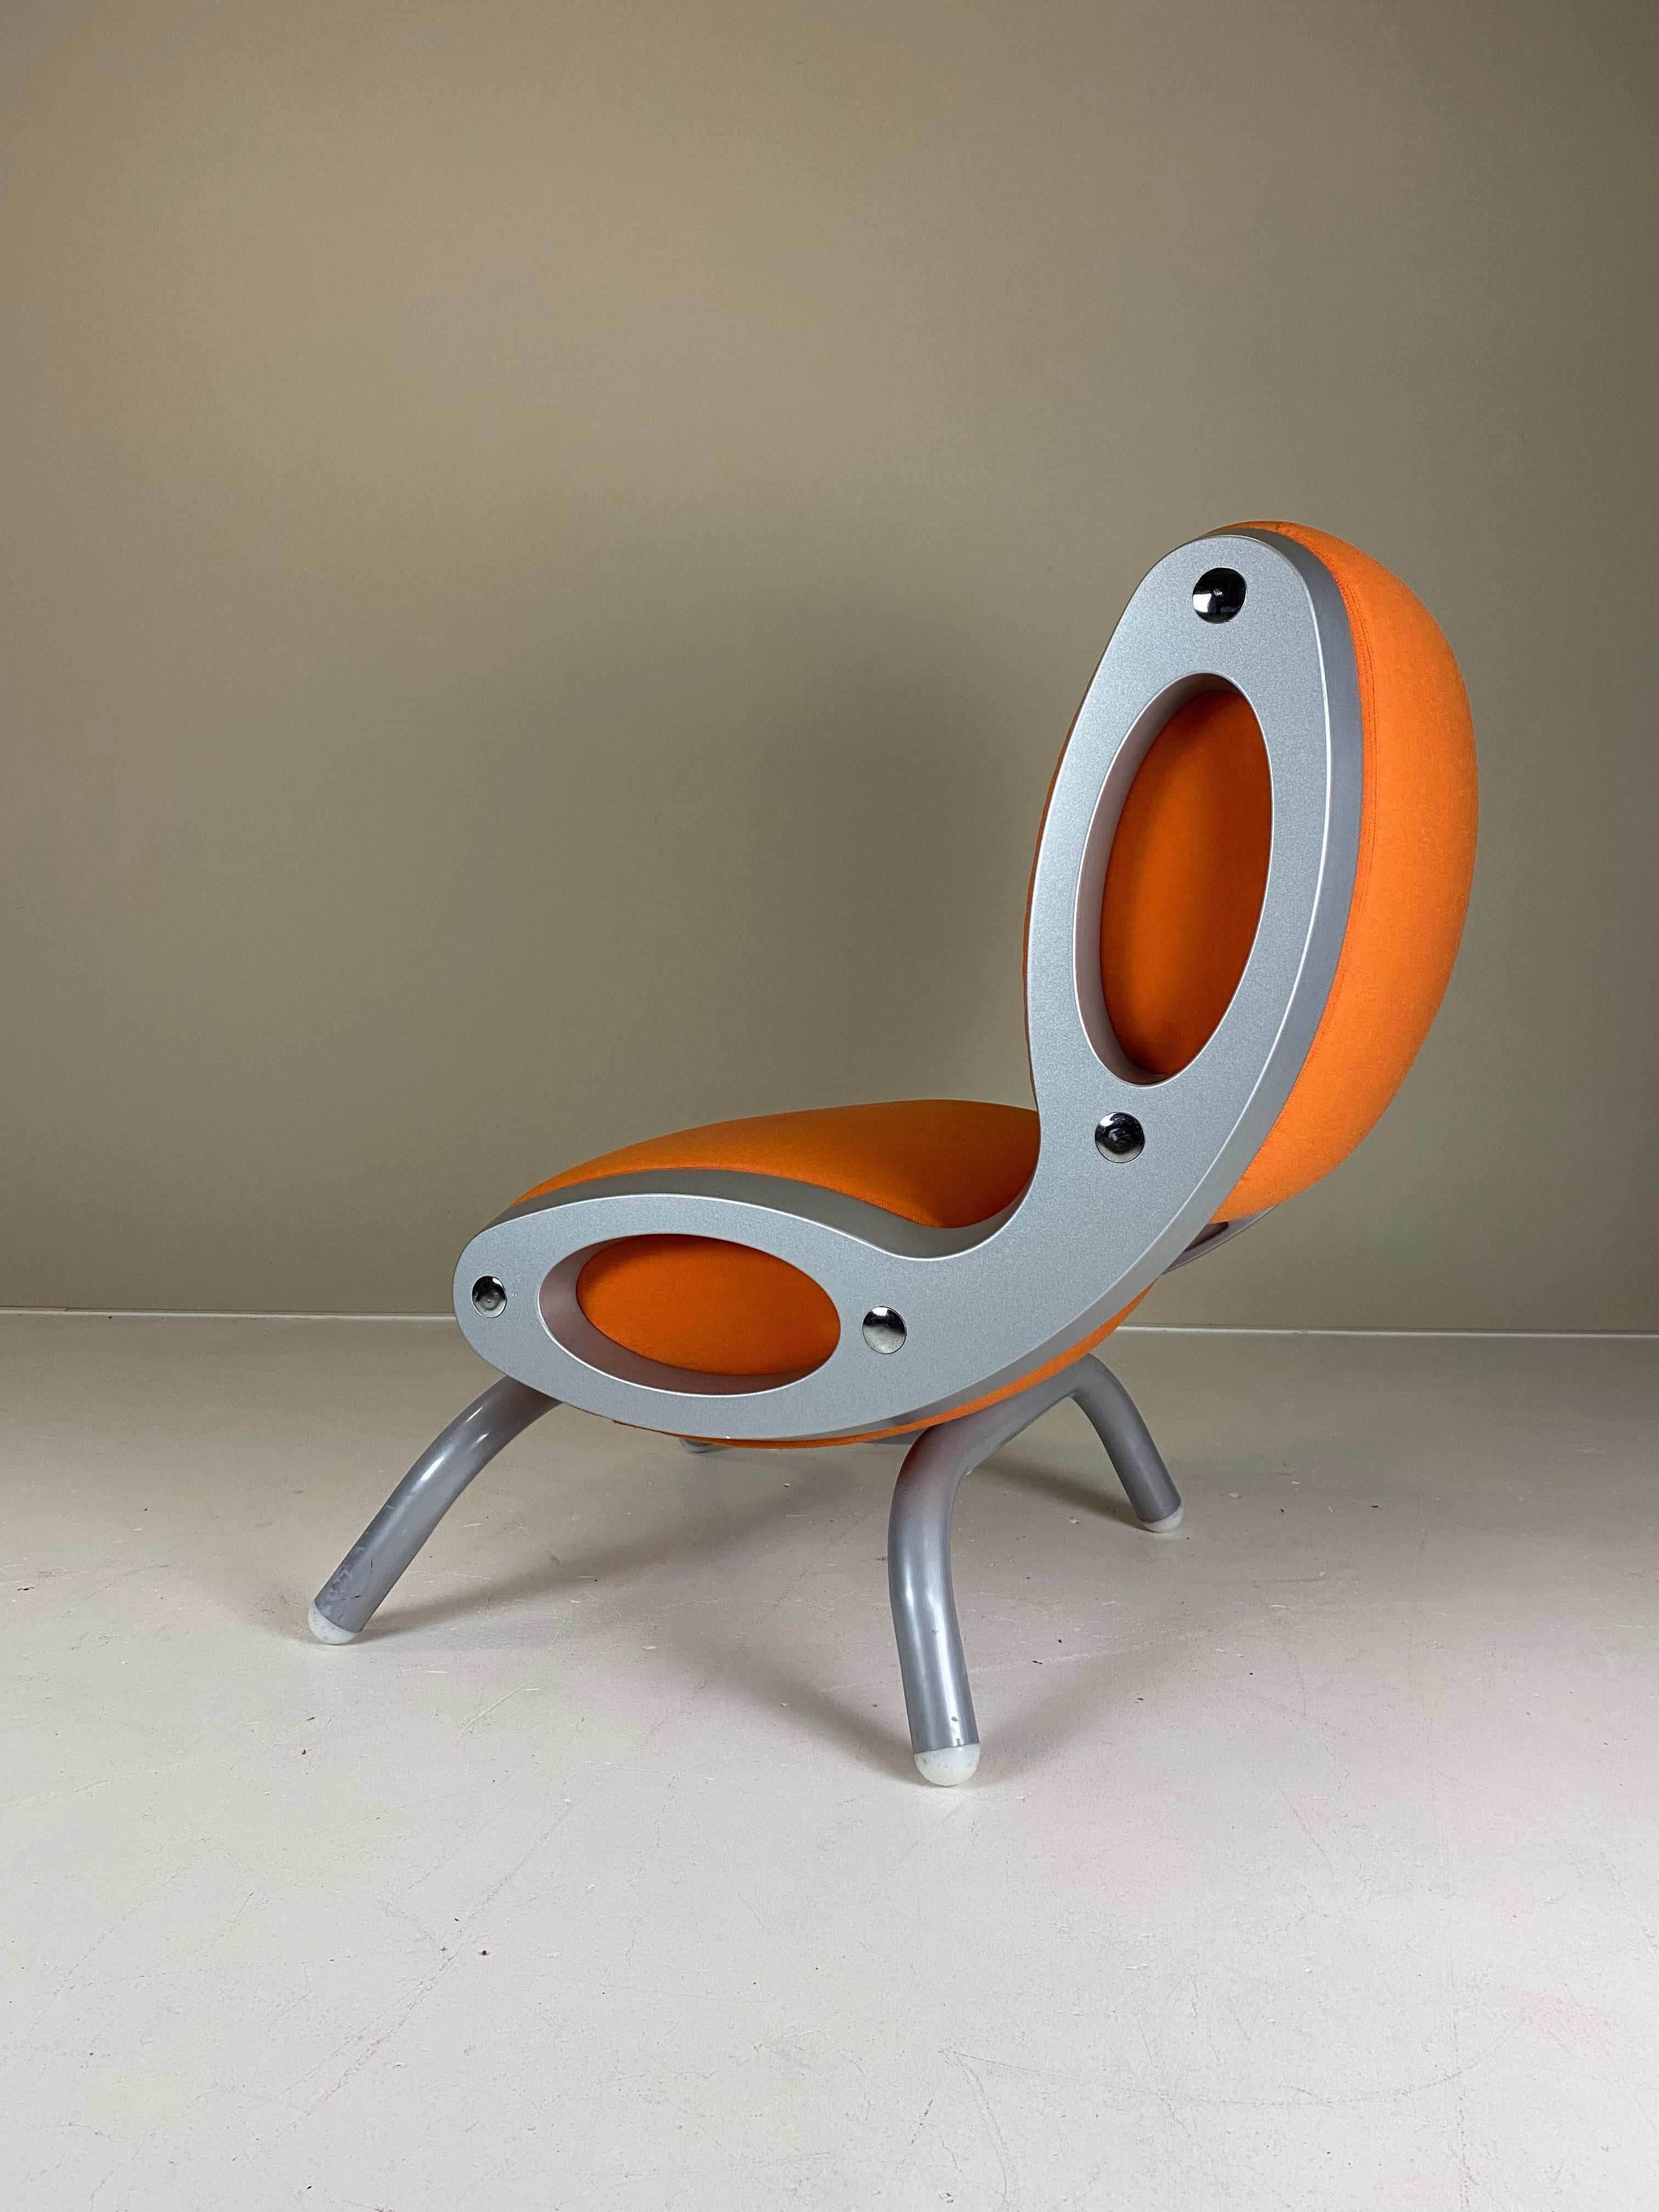 Futurist Set of 2 Moroso Gluon Reception Chairs by Marc Newson, 1990s For Sale